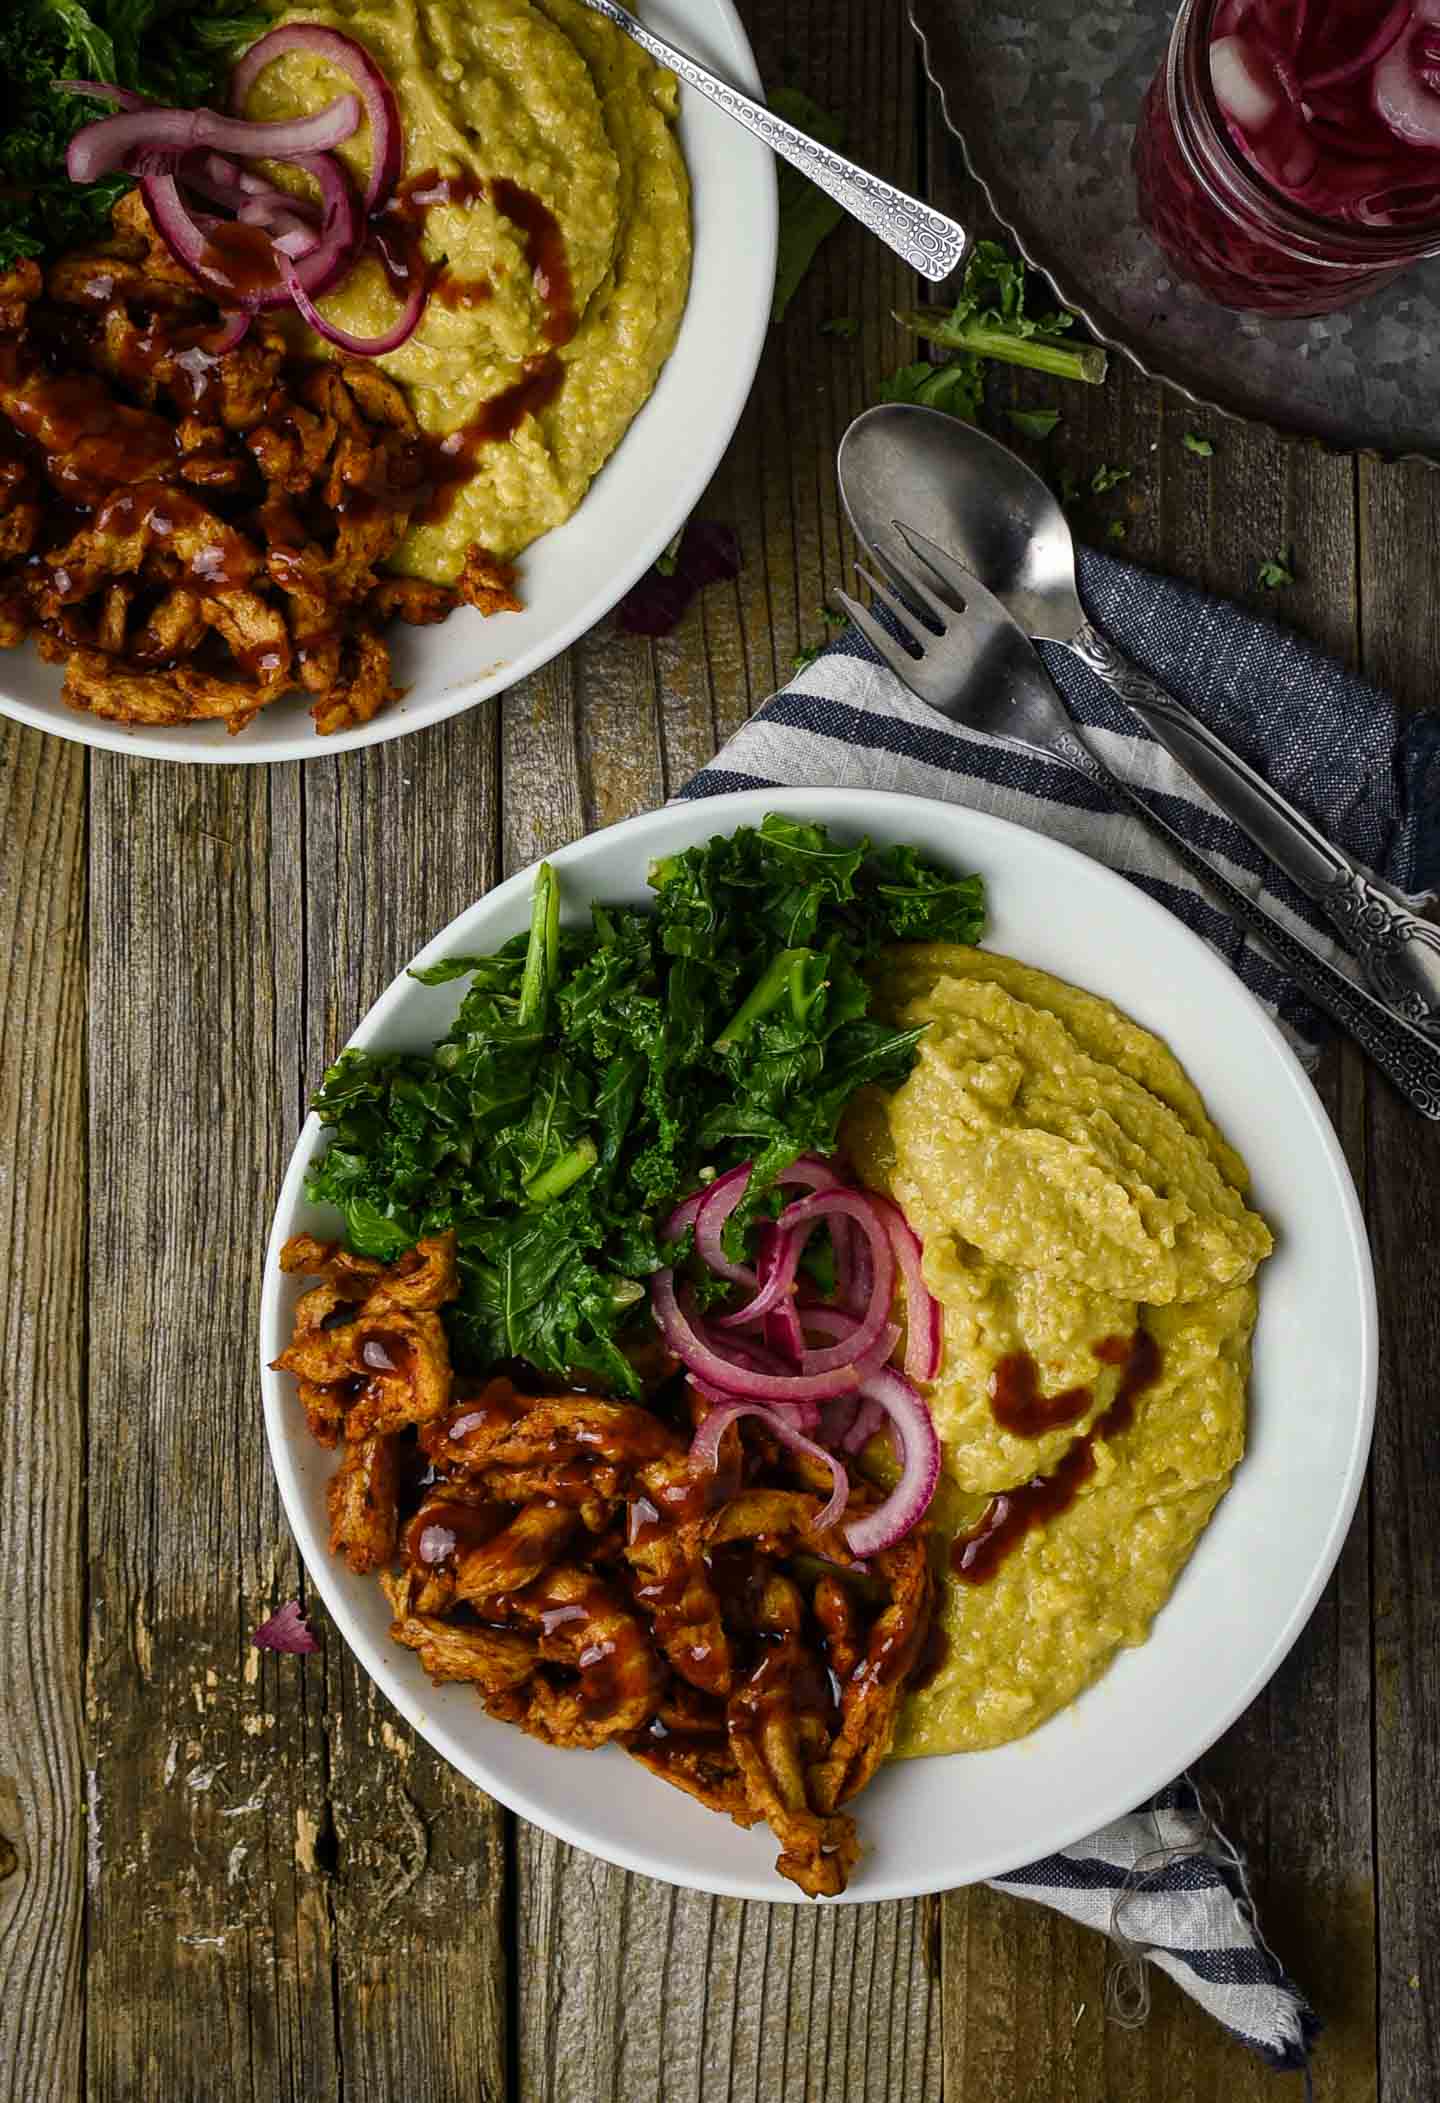 Vegan Grits Bowl with BBQ Soy Curls and Sauteed Kale is the definition of comfort food. A delicious and healthy plant-based breakfast bowl featuring creamy cheesy grits, hearty bbq soy curls, and greens.